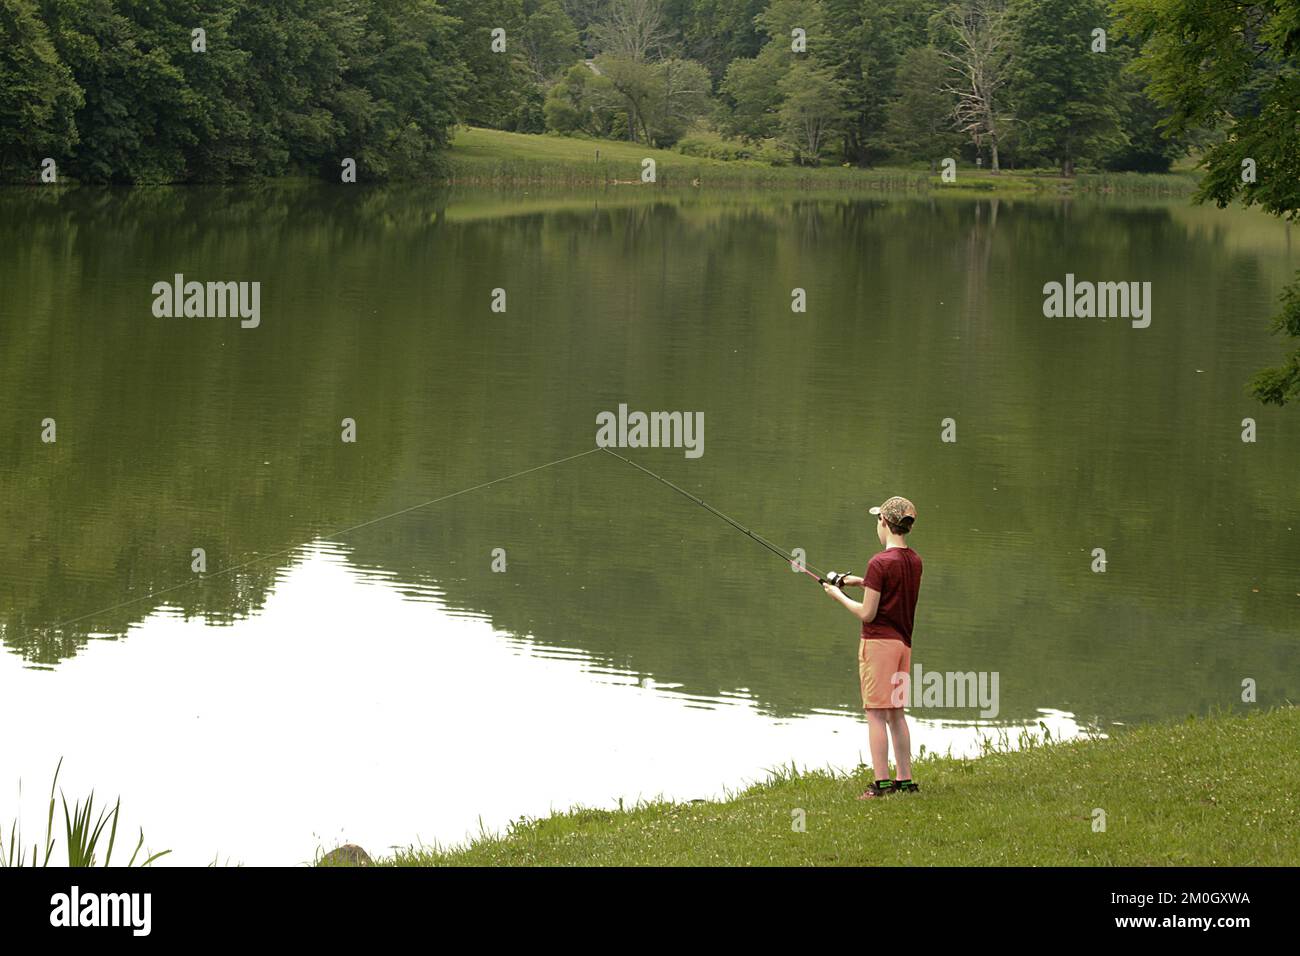 Boy casting fishing line into lake on a summer day Stock Photo - Alamy